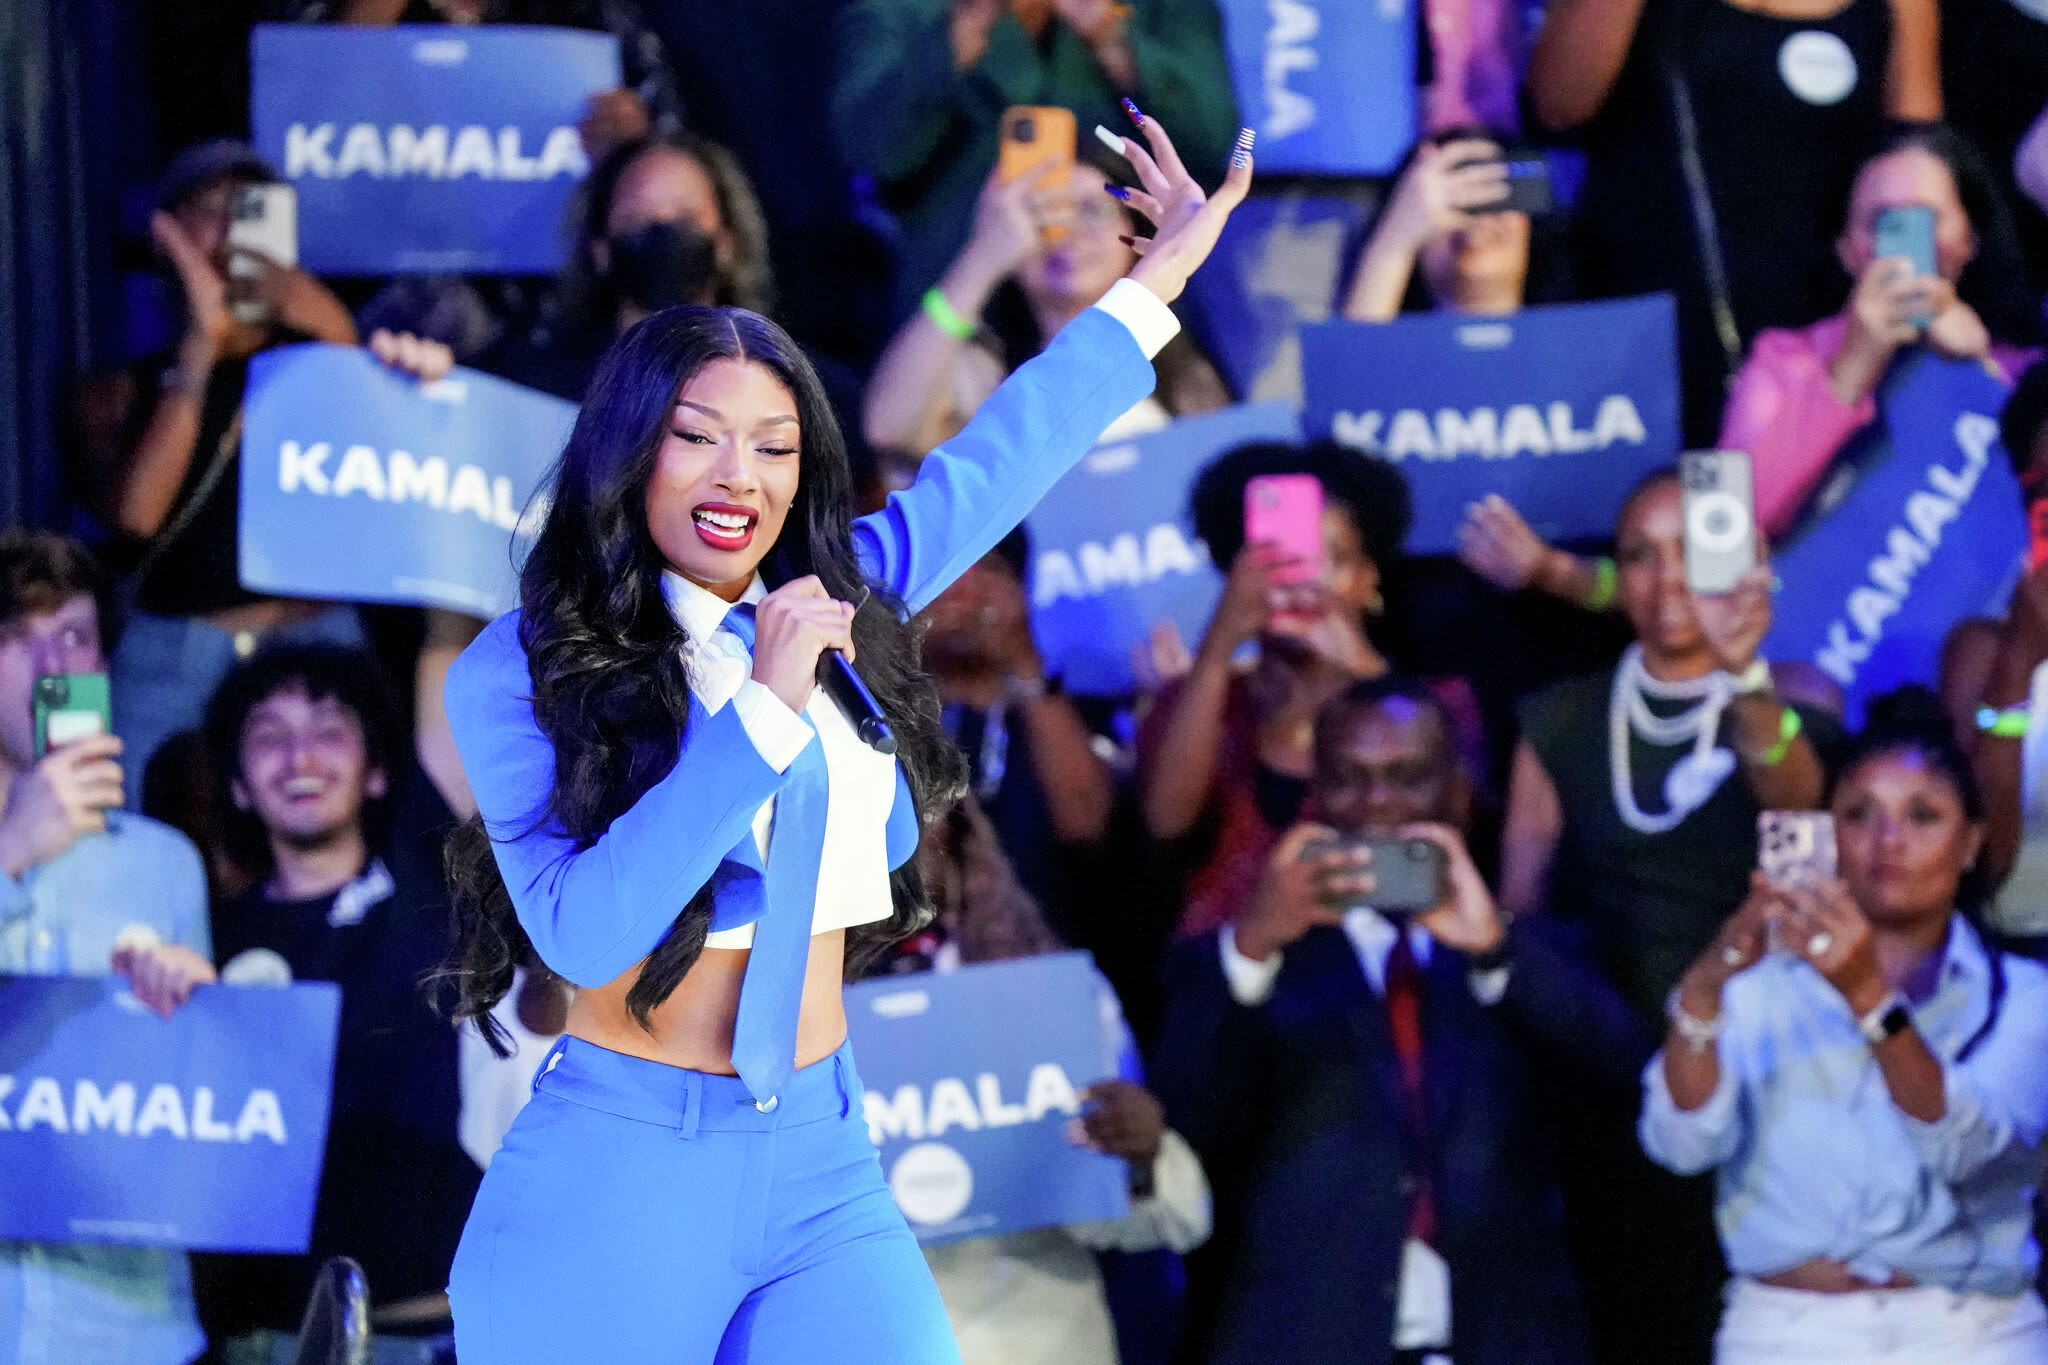 Megan Thee Stallion's campaign performance says a lot about Kamala Harris